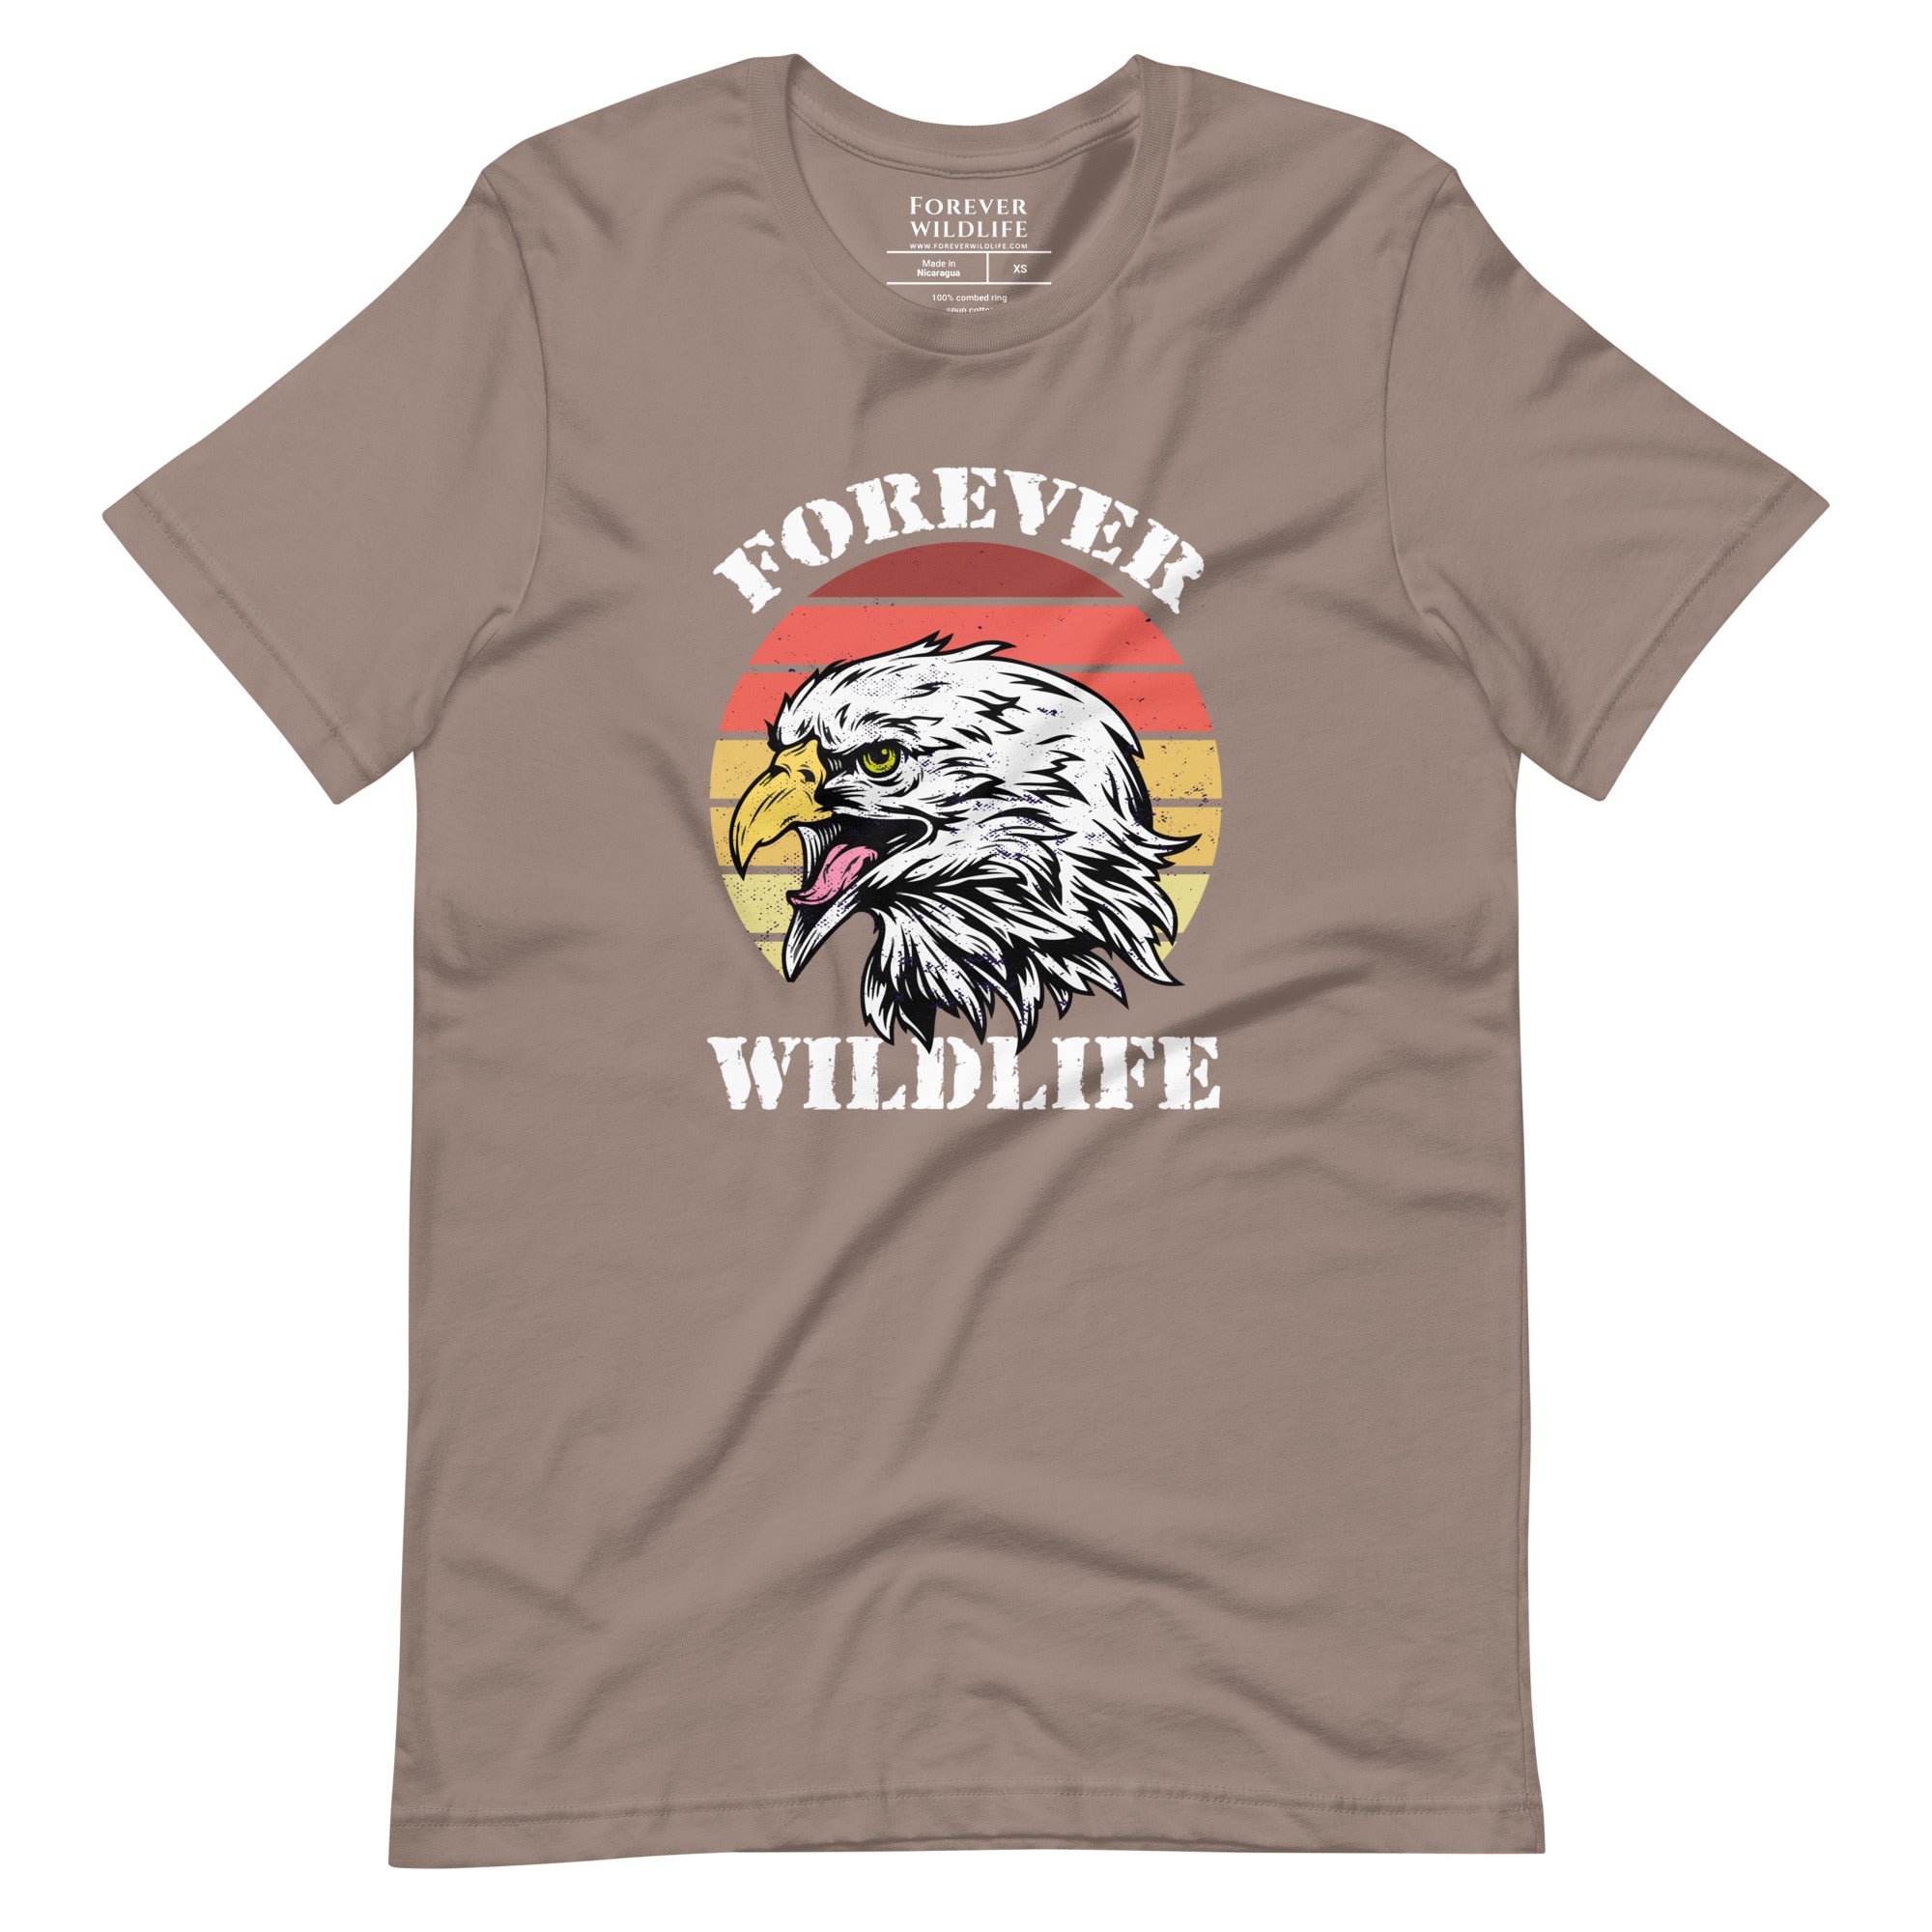 Eagle T-Shirt in Pebble – Premium Wildlife T-Shirt Design, Eagle Shirts and Wildlife Apparel from Forever Wildlife